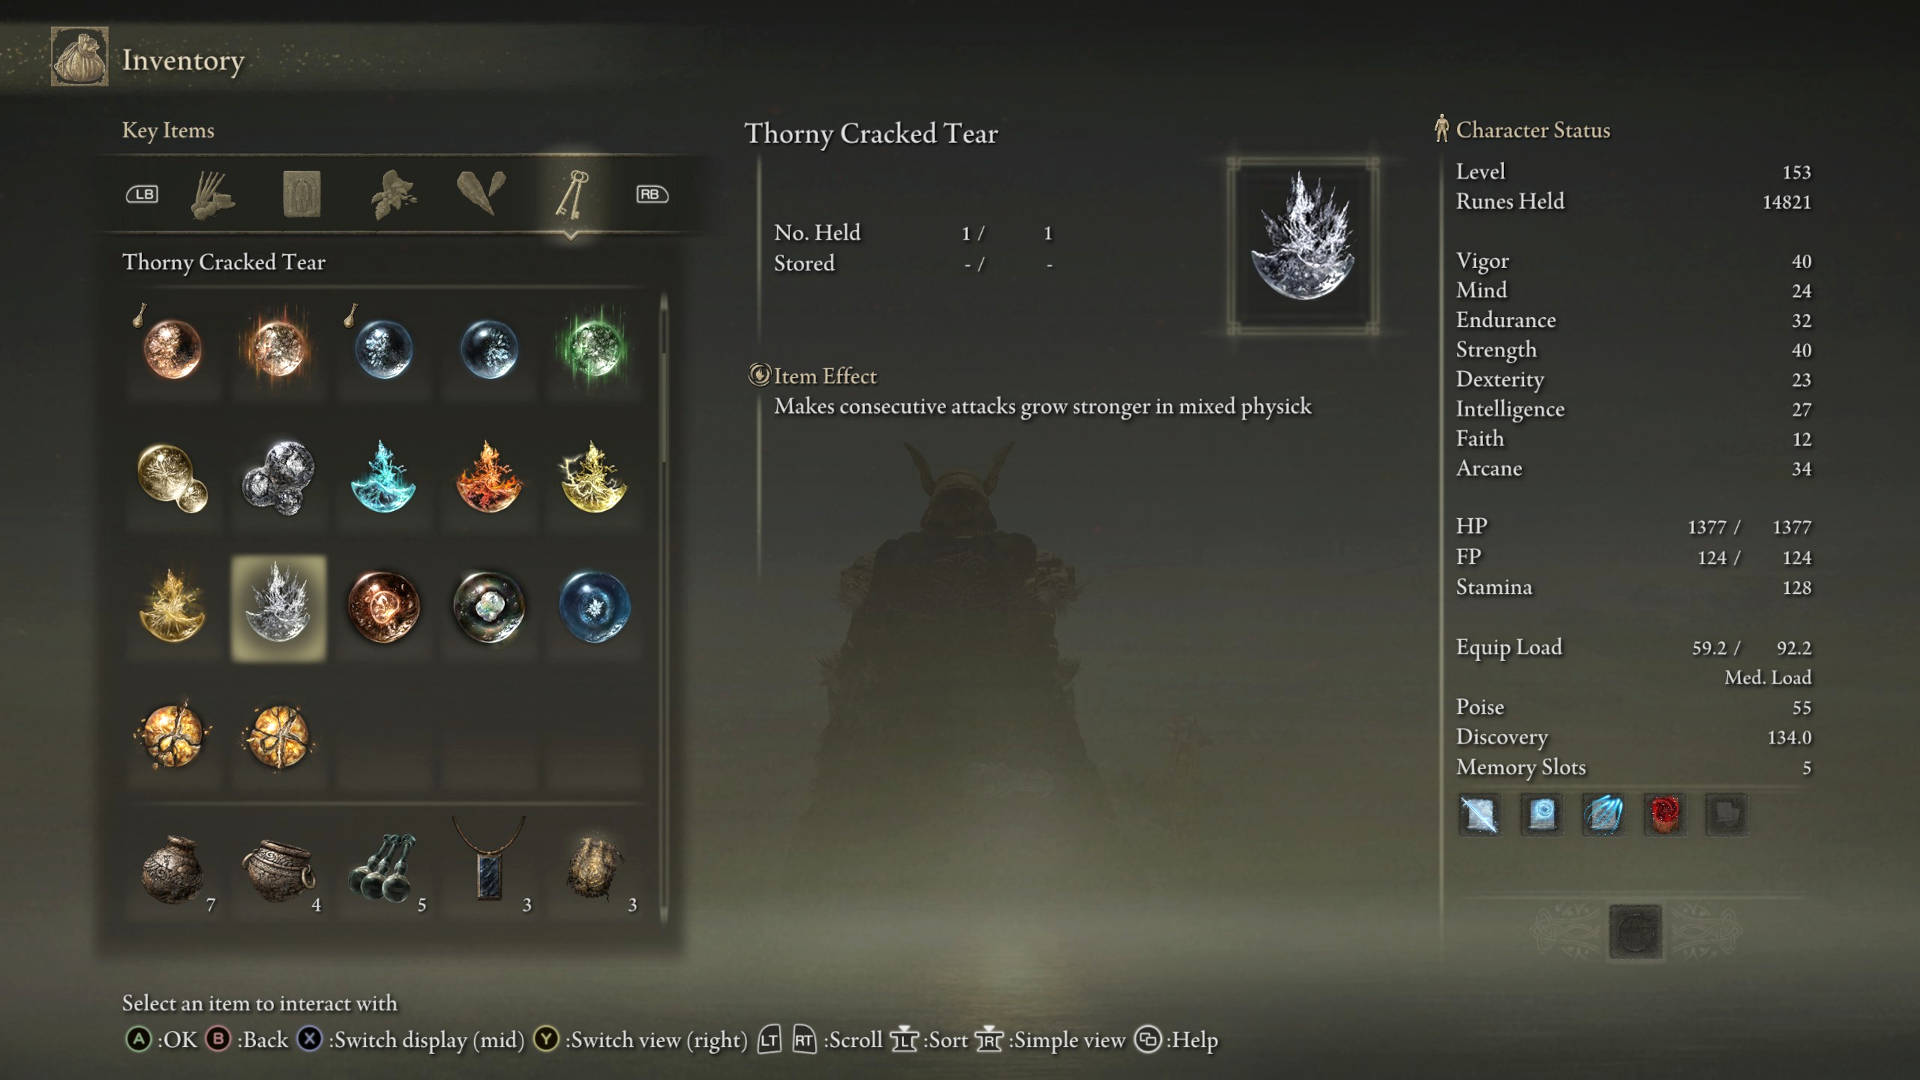 Elden Ring crystal tears: the Thorny Cracked tear in the inventory menu.